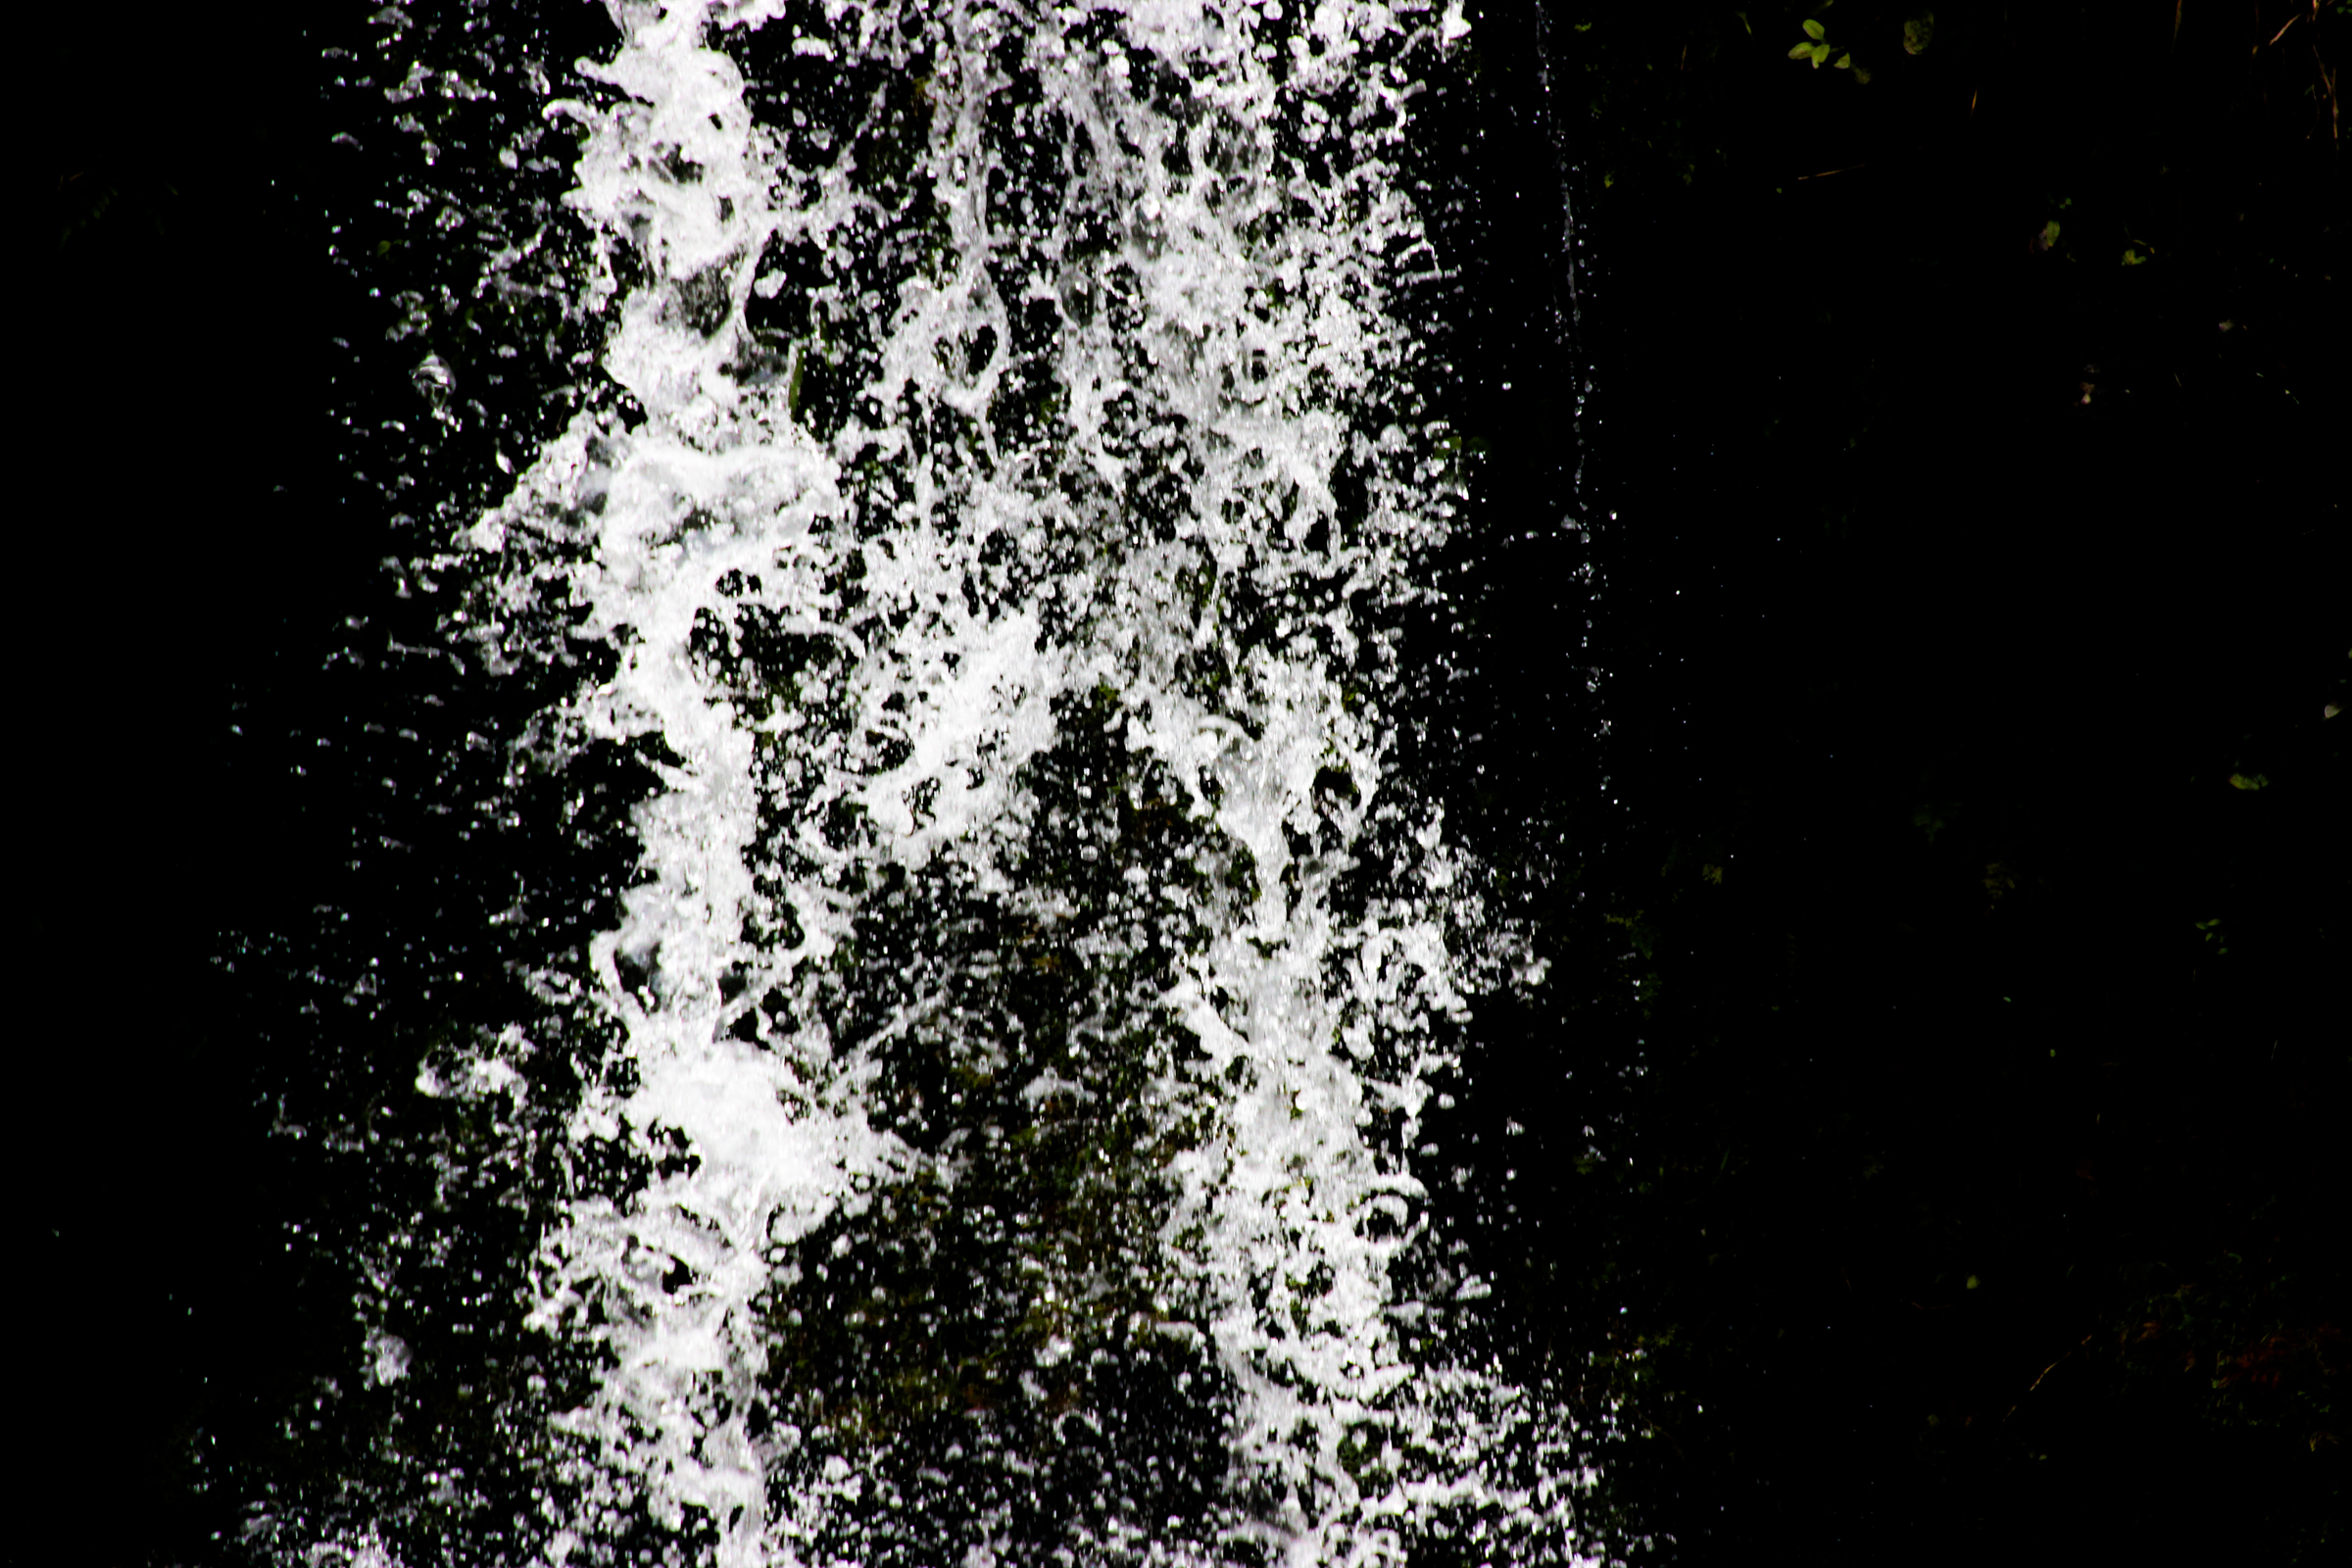 Falling water texture photo